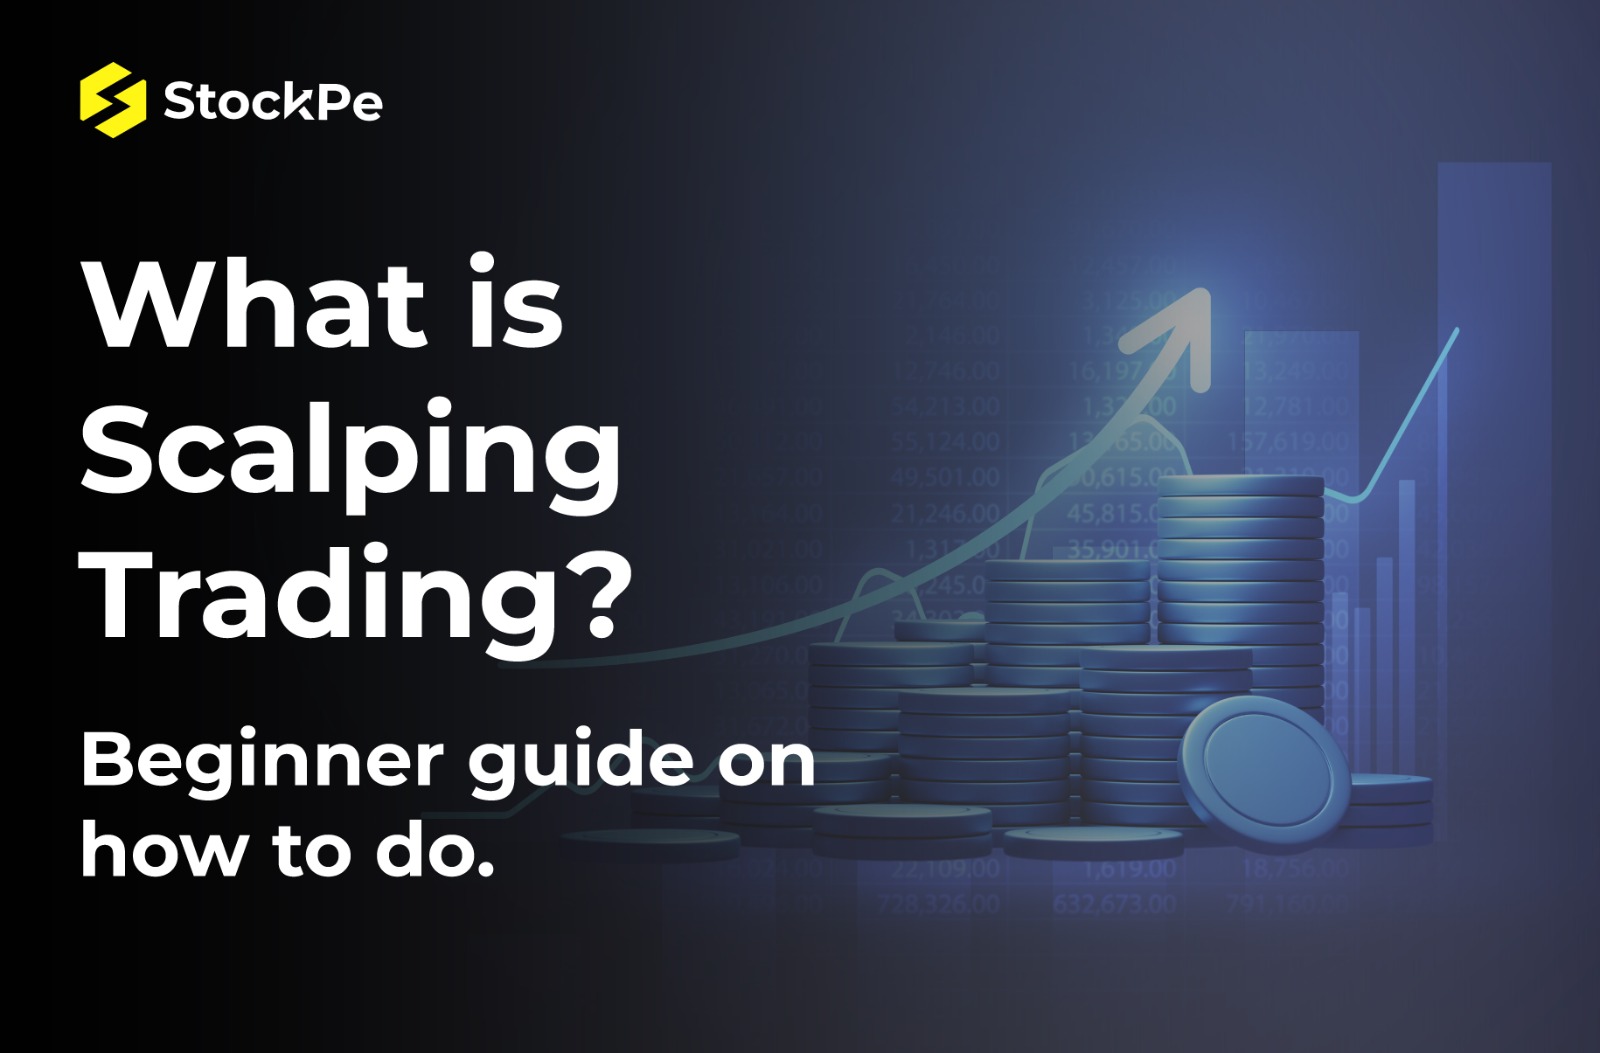 You are currently viewing What is Scalping Trading? Beginner guide on how to do scalping